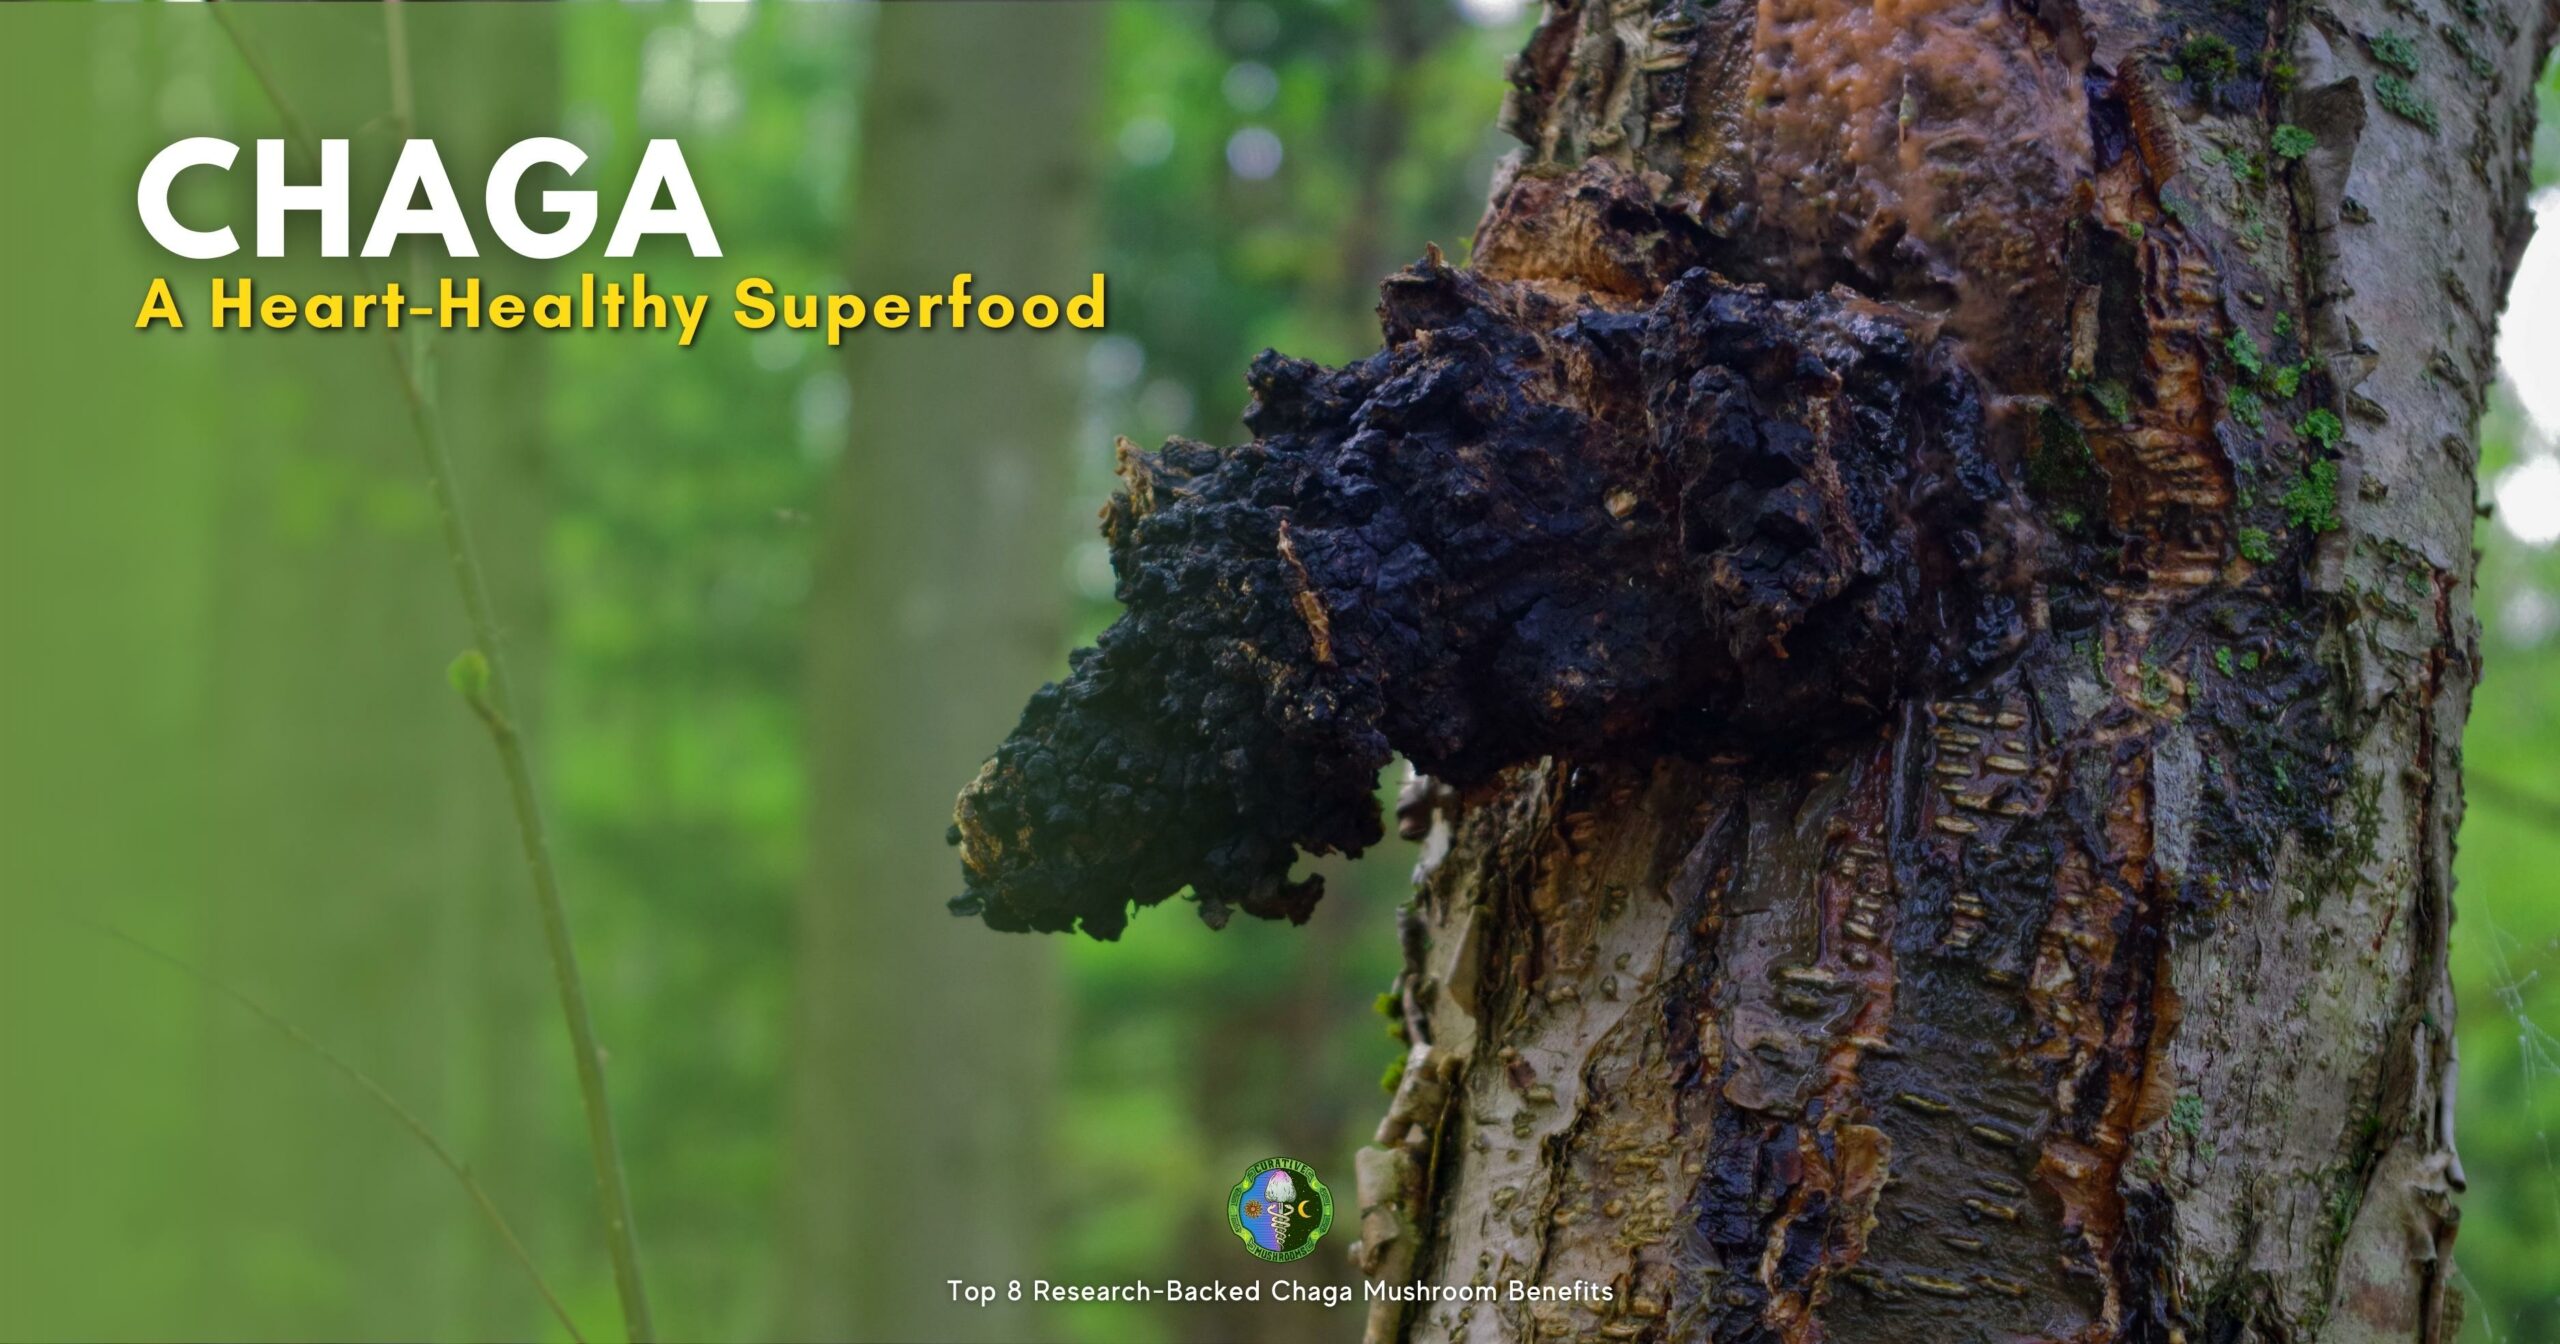 Top 8 Research-Backed Chaga Mushroom Benefits - Supports cardiovascular health - betulinic acid - inhibit an enzyme called ACE - reduced blood pressure